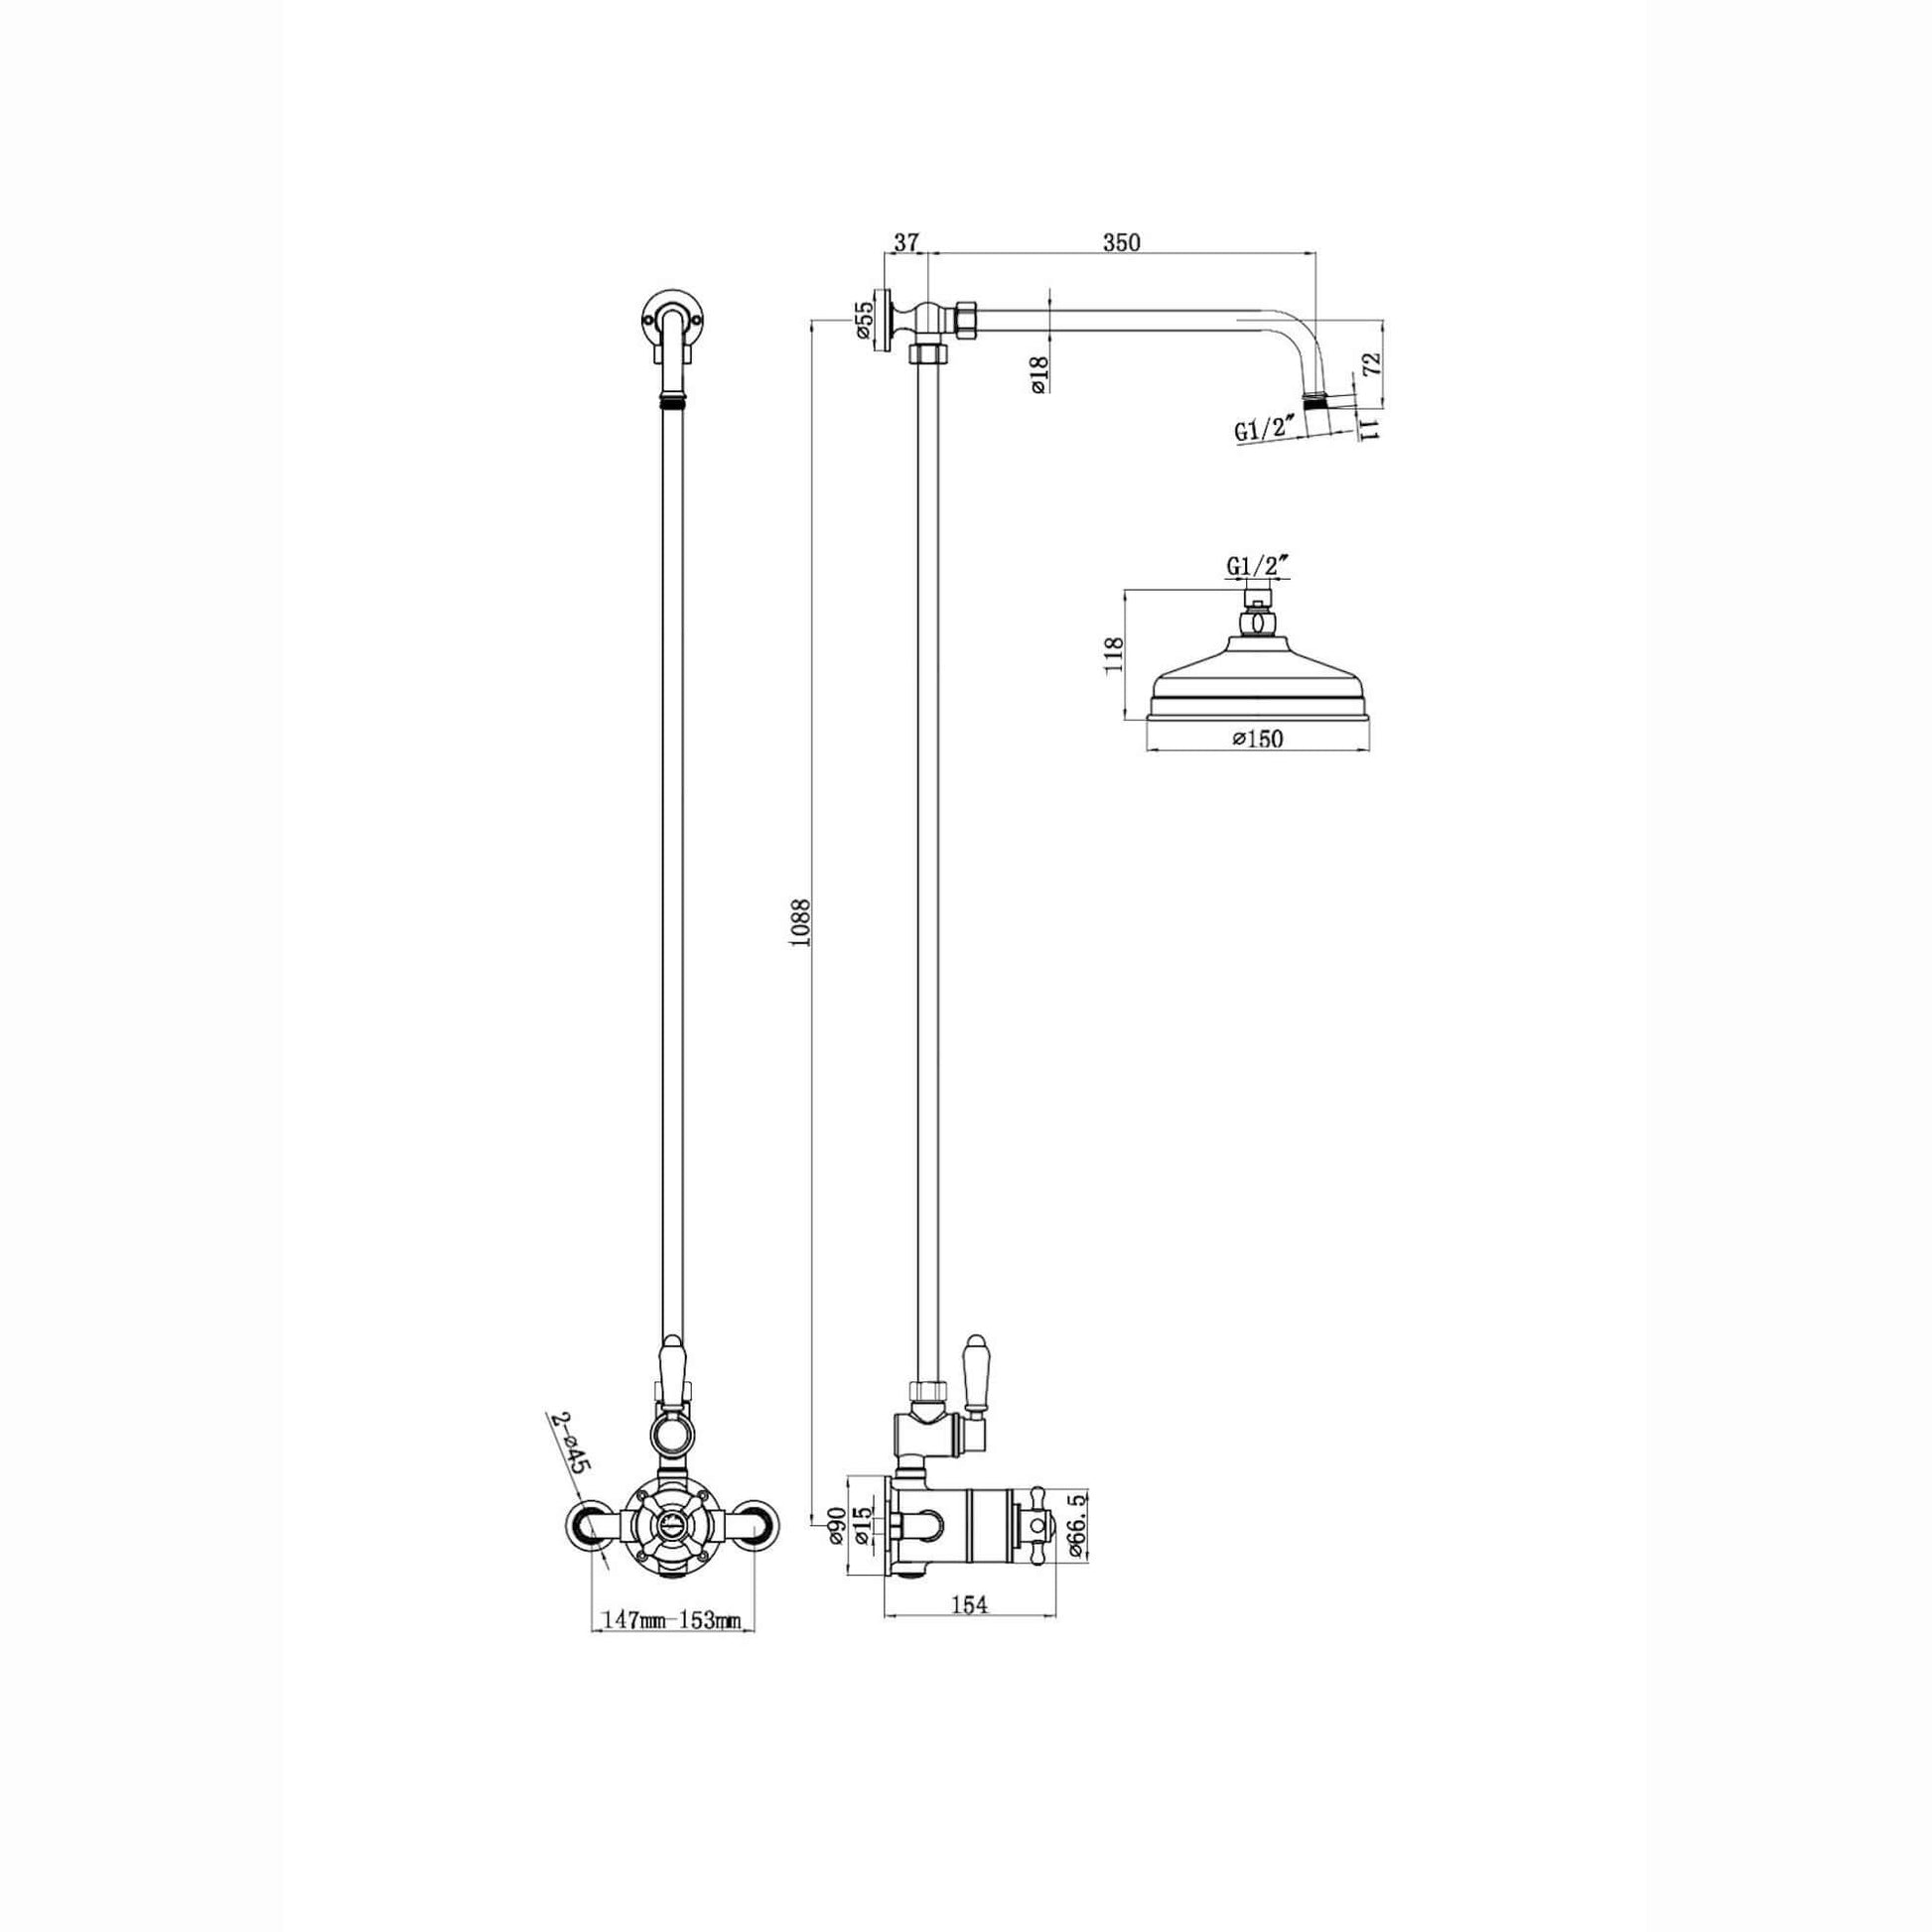 Downton Exposed Traditional Thermostatic Shower Set Single Outlet Incl. Twin Shower Valve, Rigid Riser Rail, 150mm Shower Head - Chrome And White - Showers